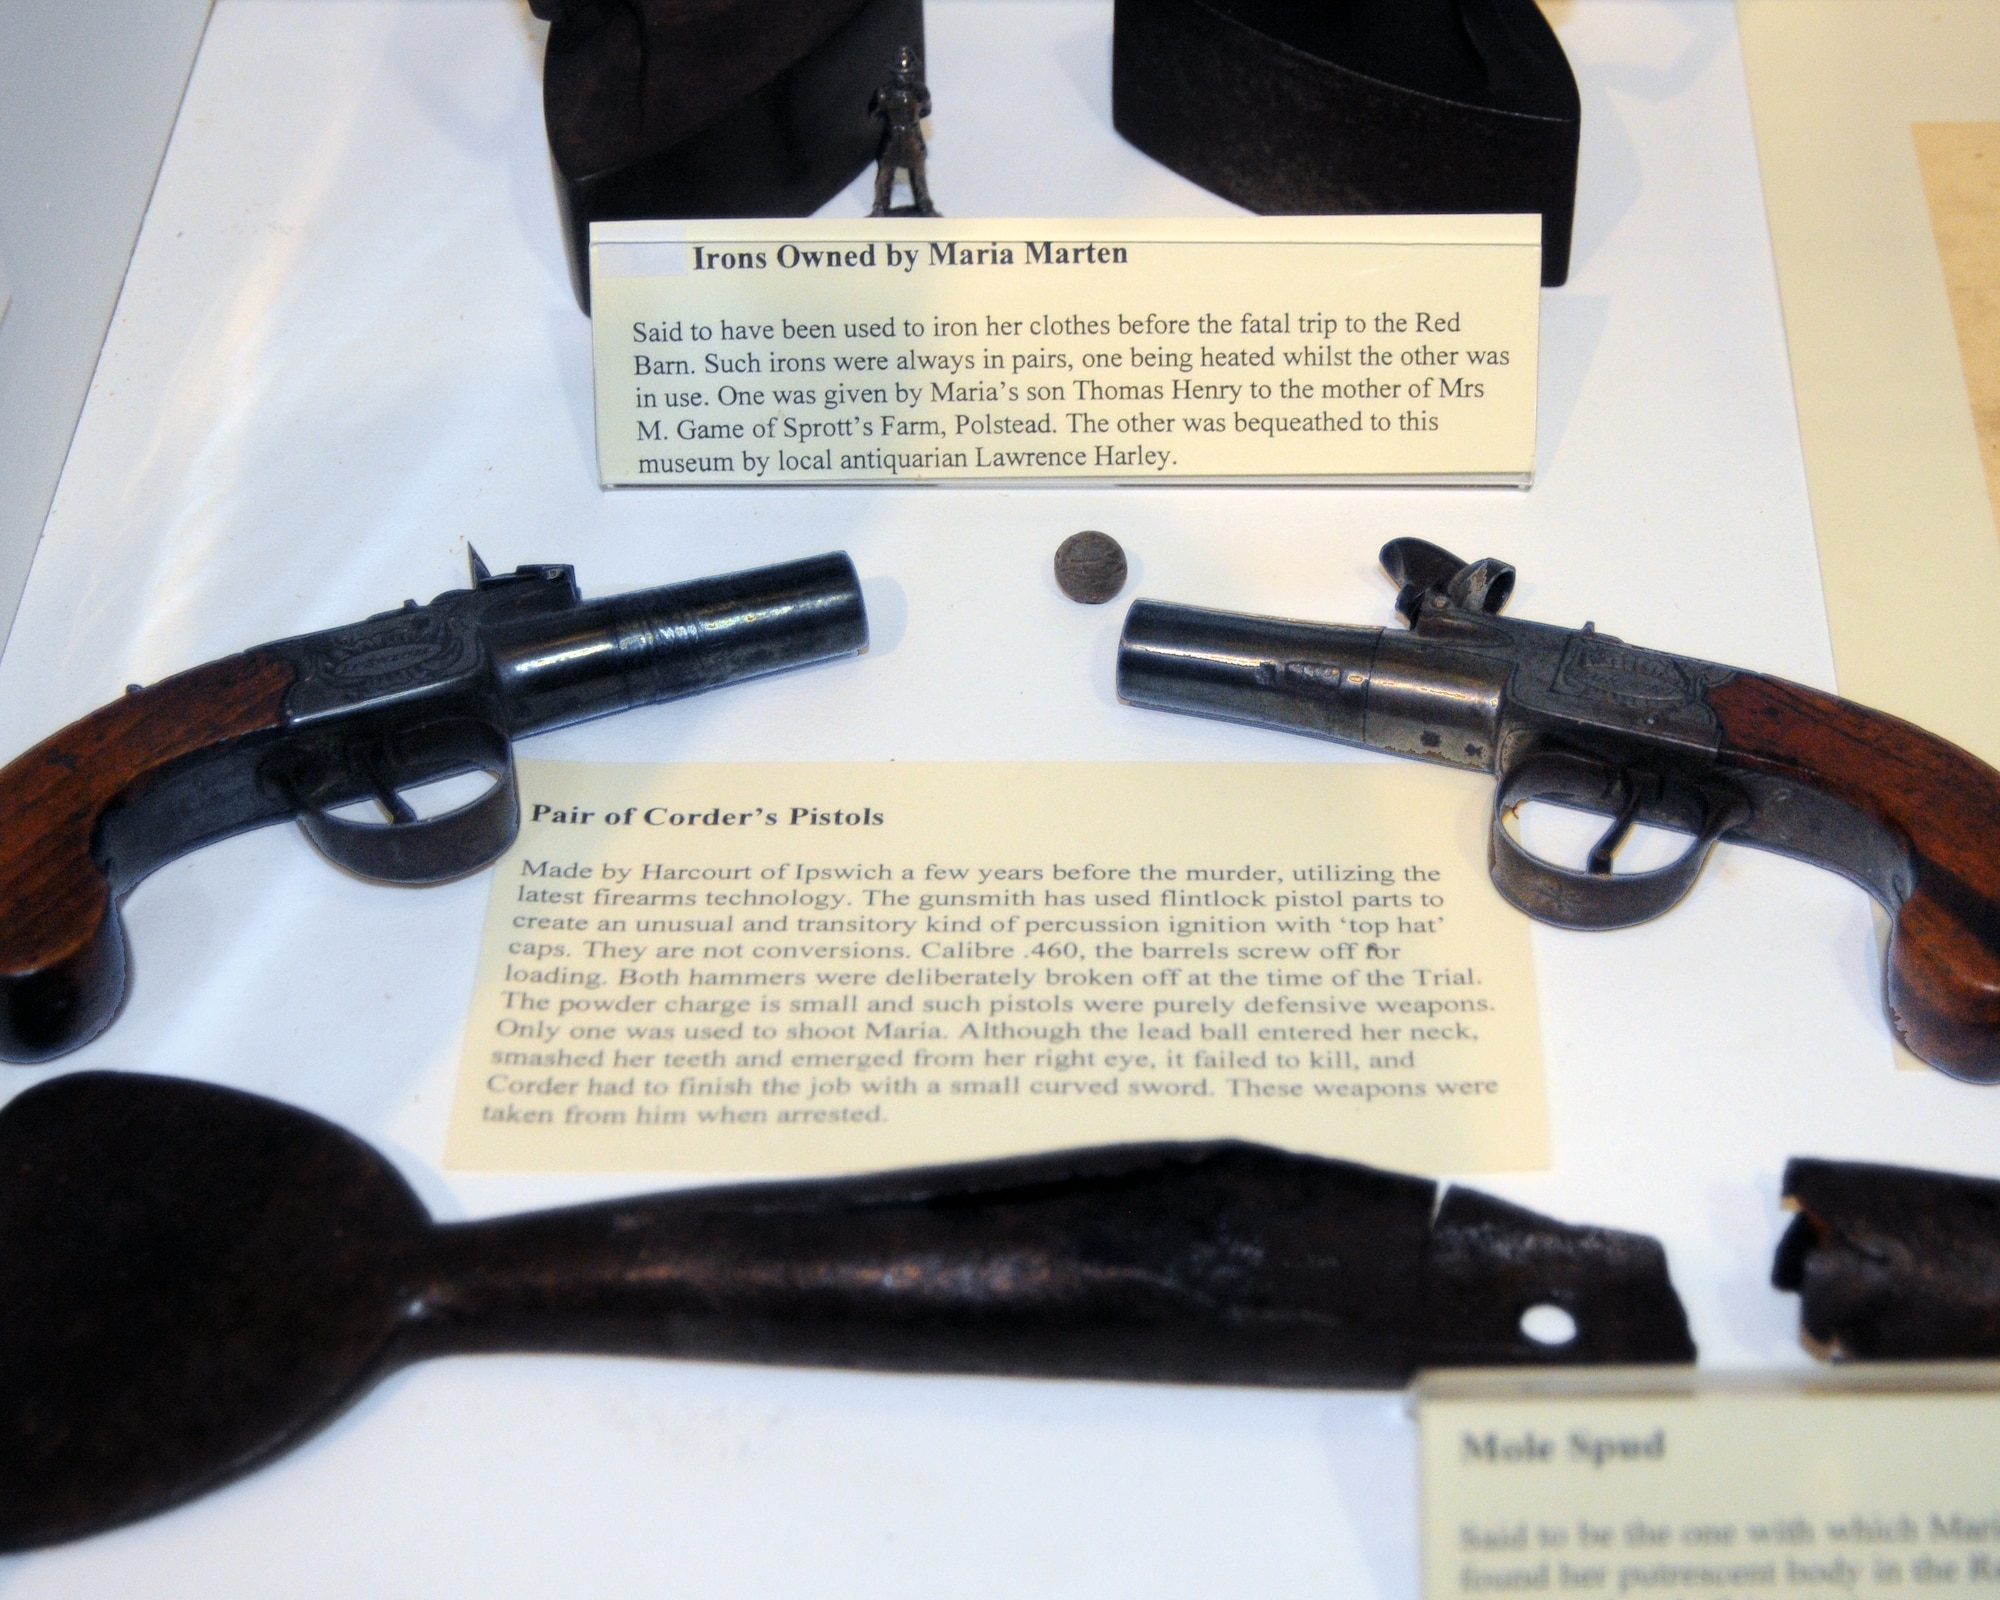 BURY ST. EDMUNDS, England – Two pistols are on display at Moyse’s Hall Museum, Bury St. Edmunds. According to court documents, these pistols belonged to William Corder, convicted and executed for the brutal murder of Maria Marten in 1827. One of the two pistols were used to shoot Marten. (U.S. Air Force photo/Tech. Sgt. Kevin Wallace)